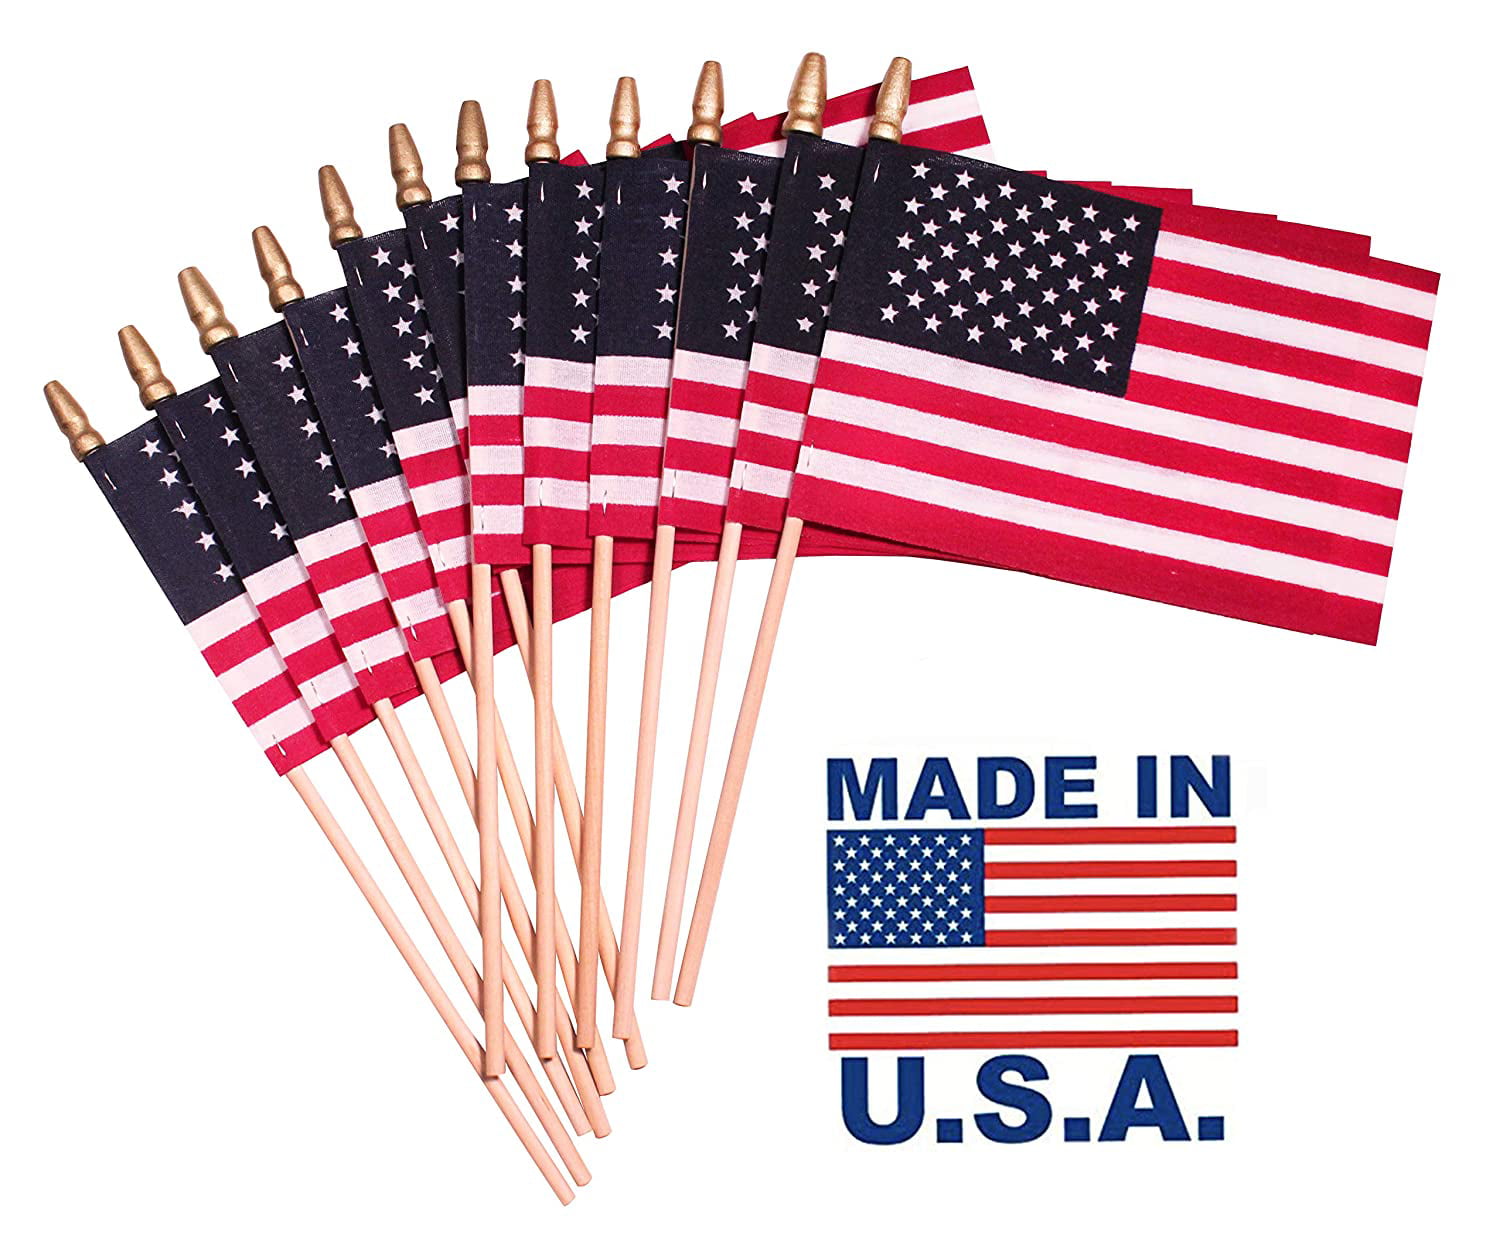 4 x 6 inch Handheld Spearhead American Flags Stick Flags with SpearTop Great for Patriotic Decorations or Celebrations Set of 12 